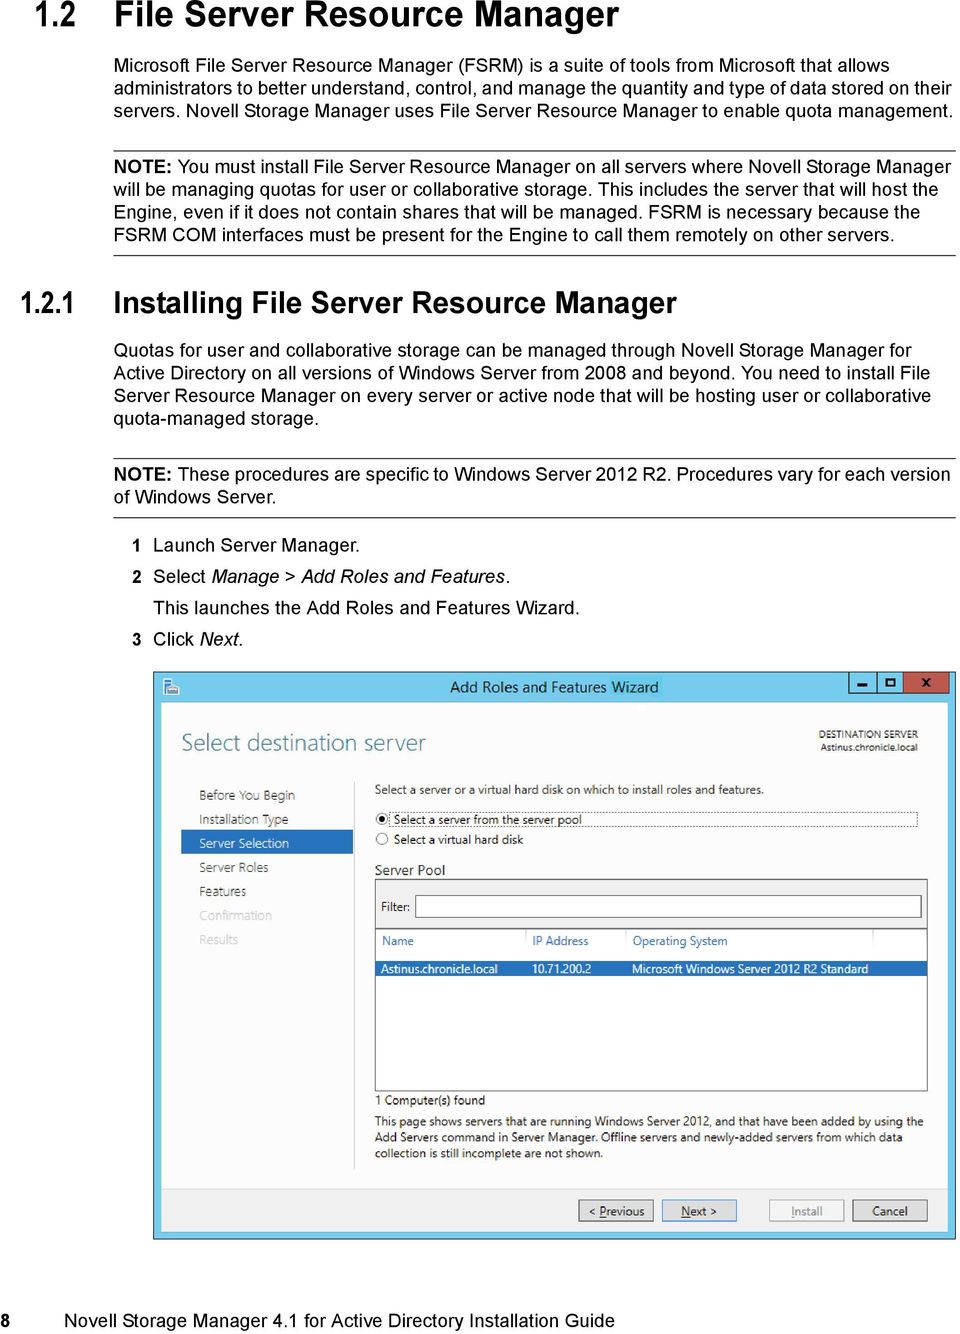 NOTE: You must install File Server Resource Manager on all servers where Novell Storage Manager will be managing quotas for user or collaborative storage.